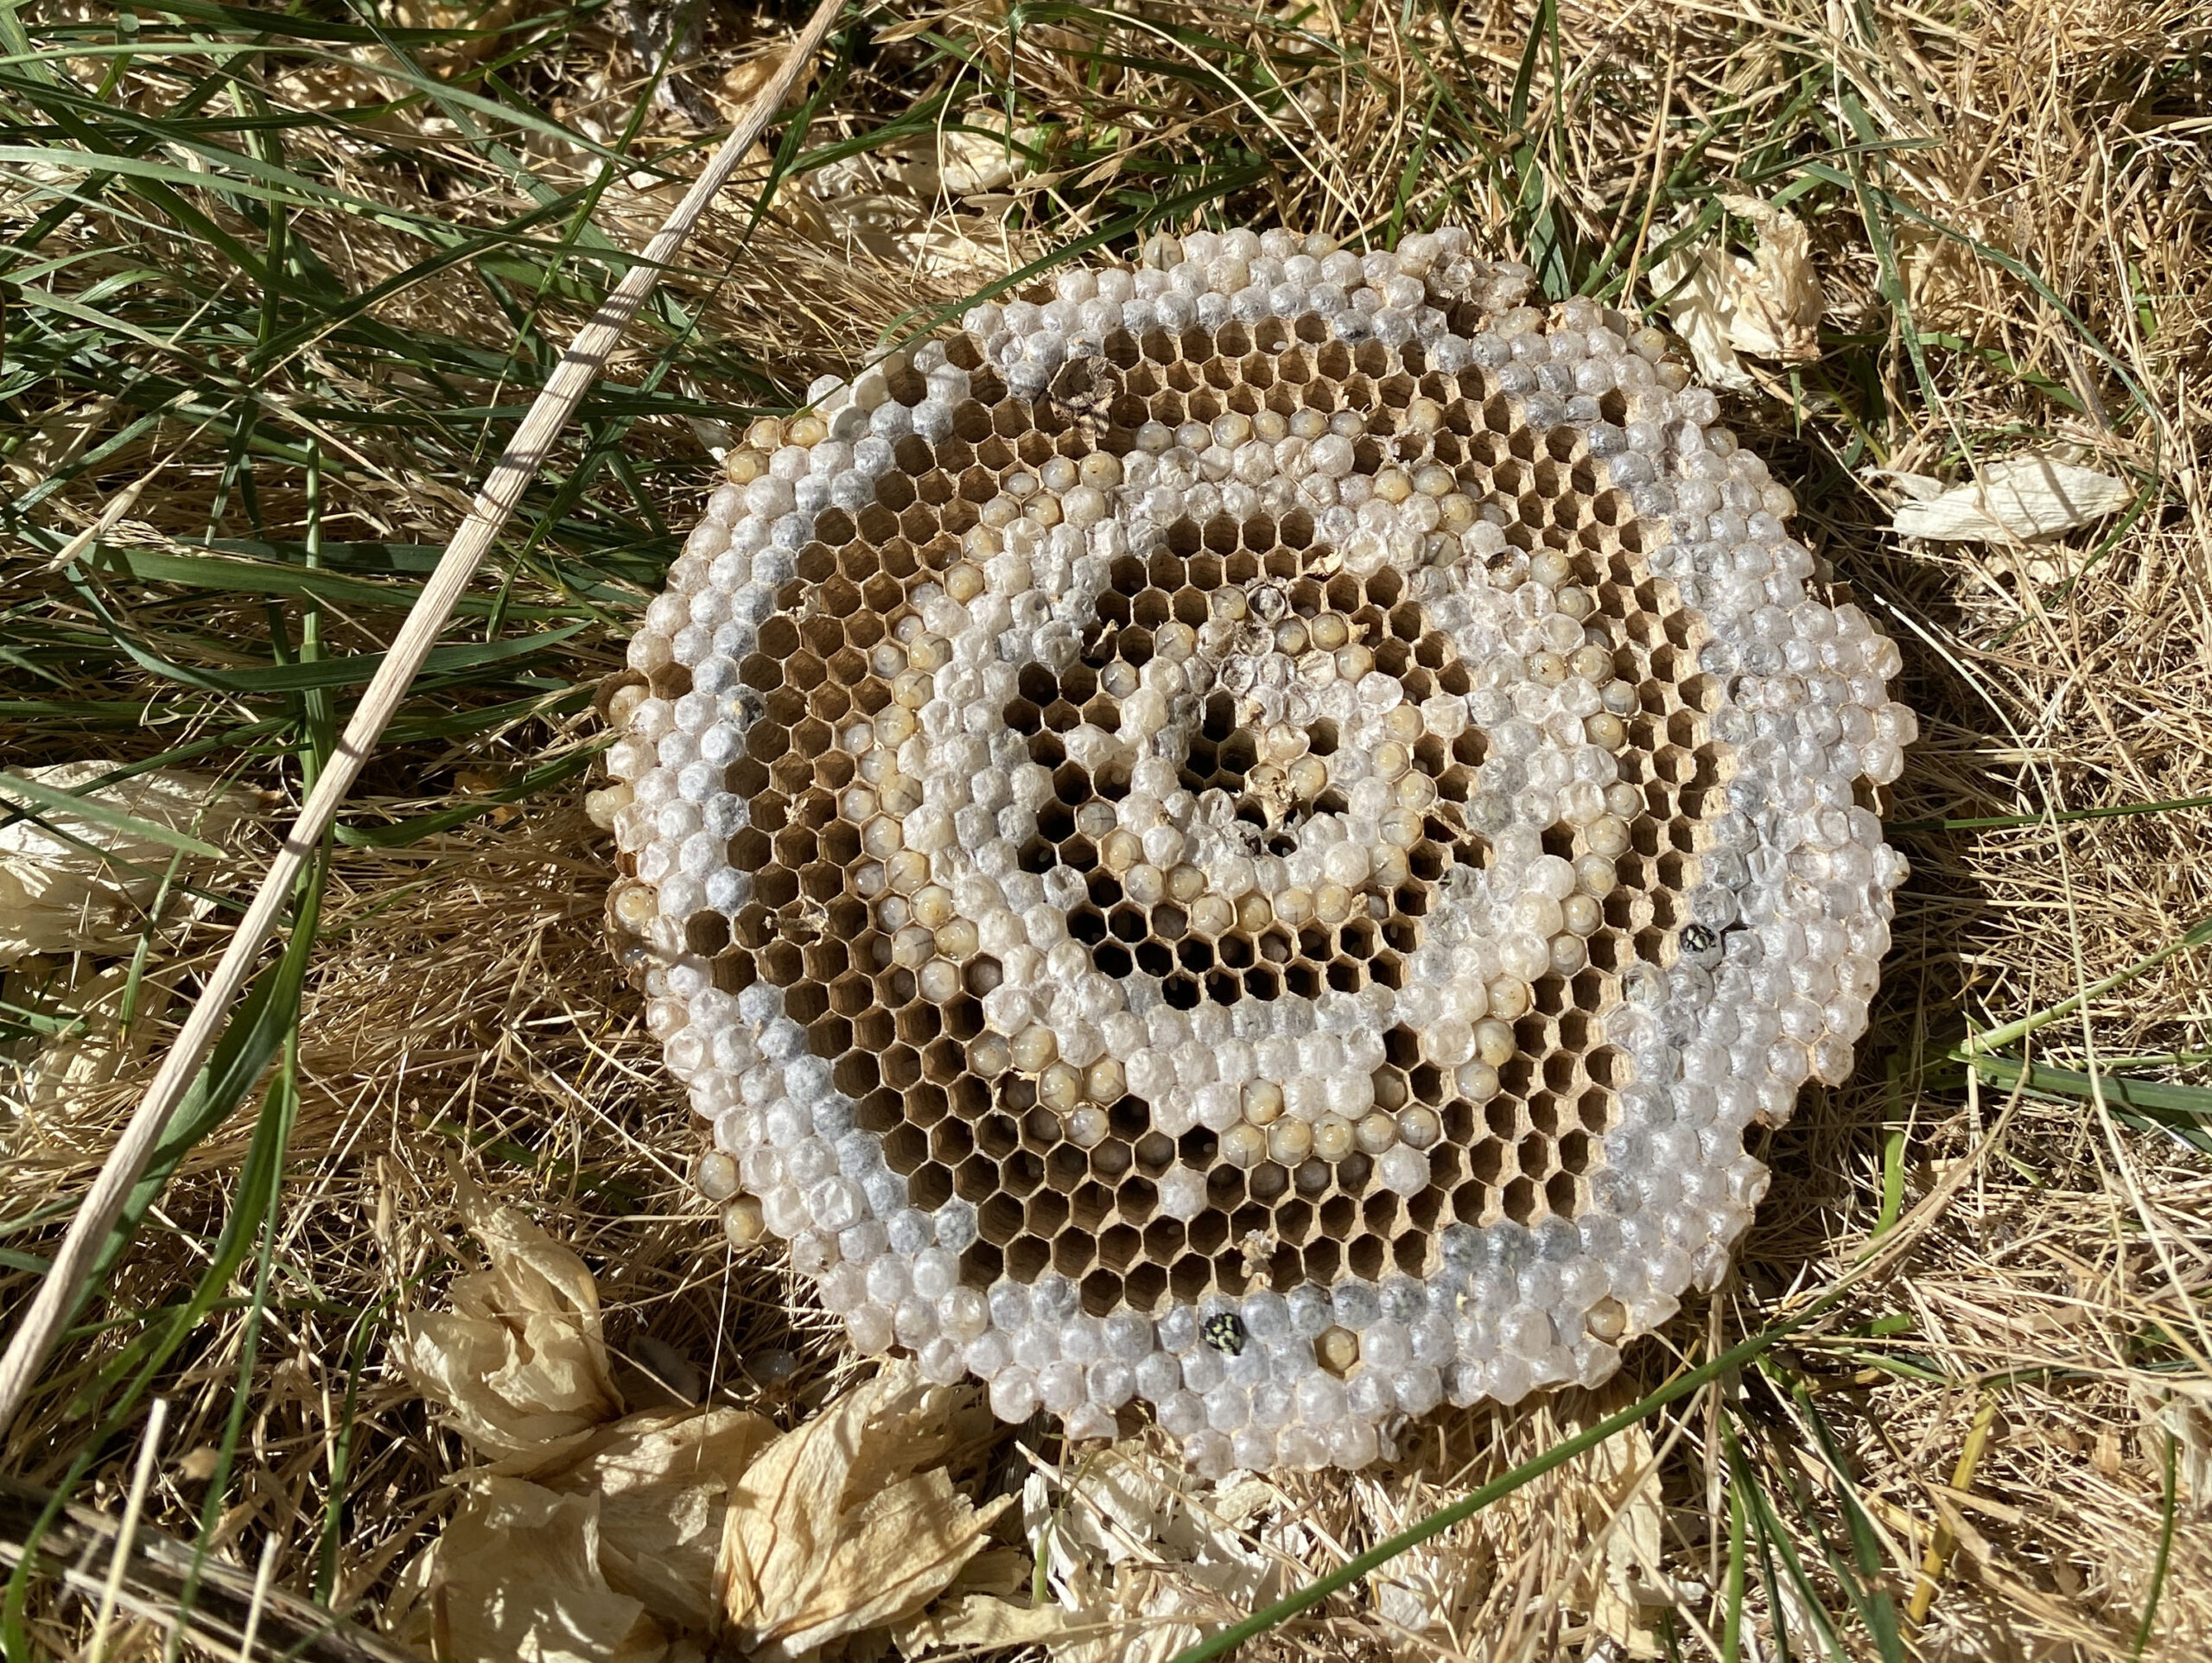 Large excavated yellow jacket nest, showing 3 concentric rings of hexagonal combs filled with white larvae